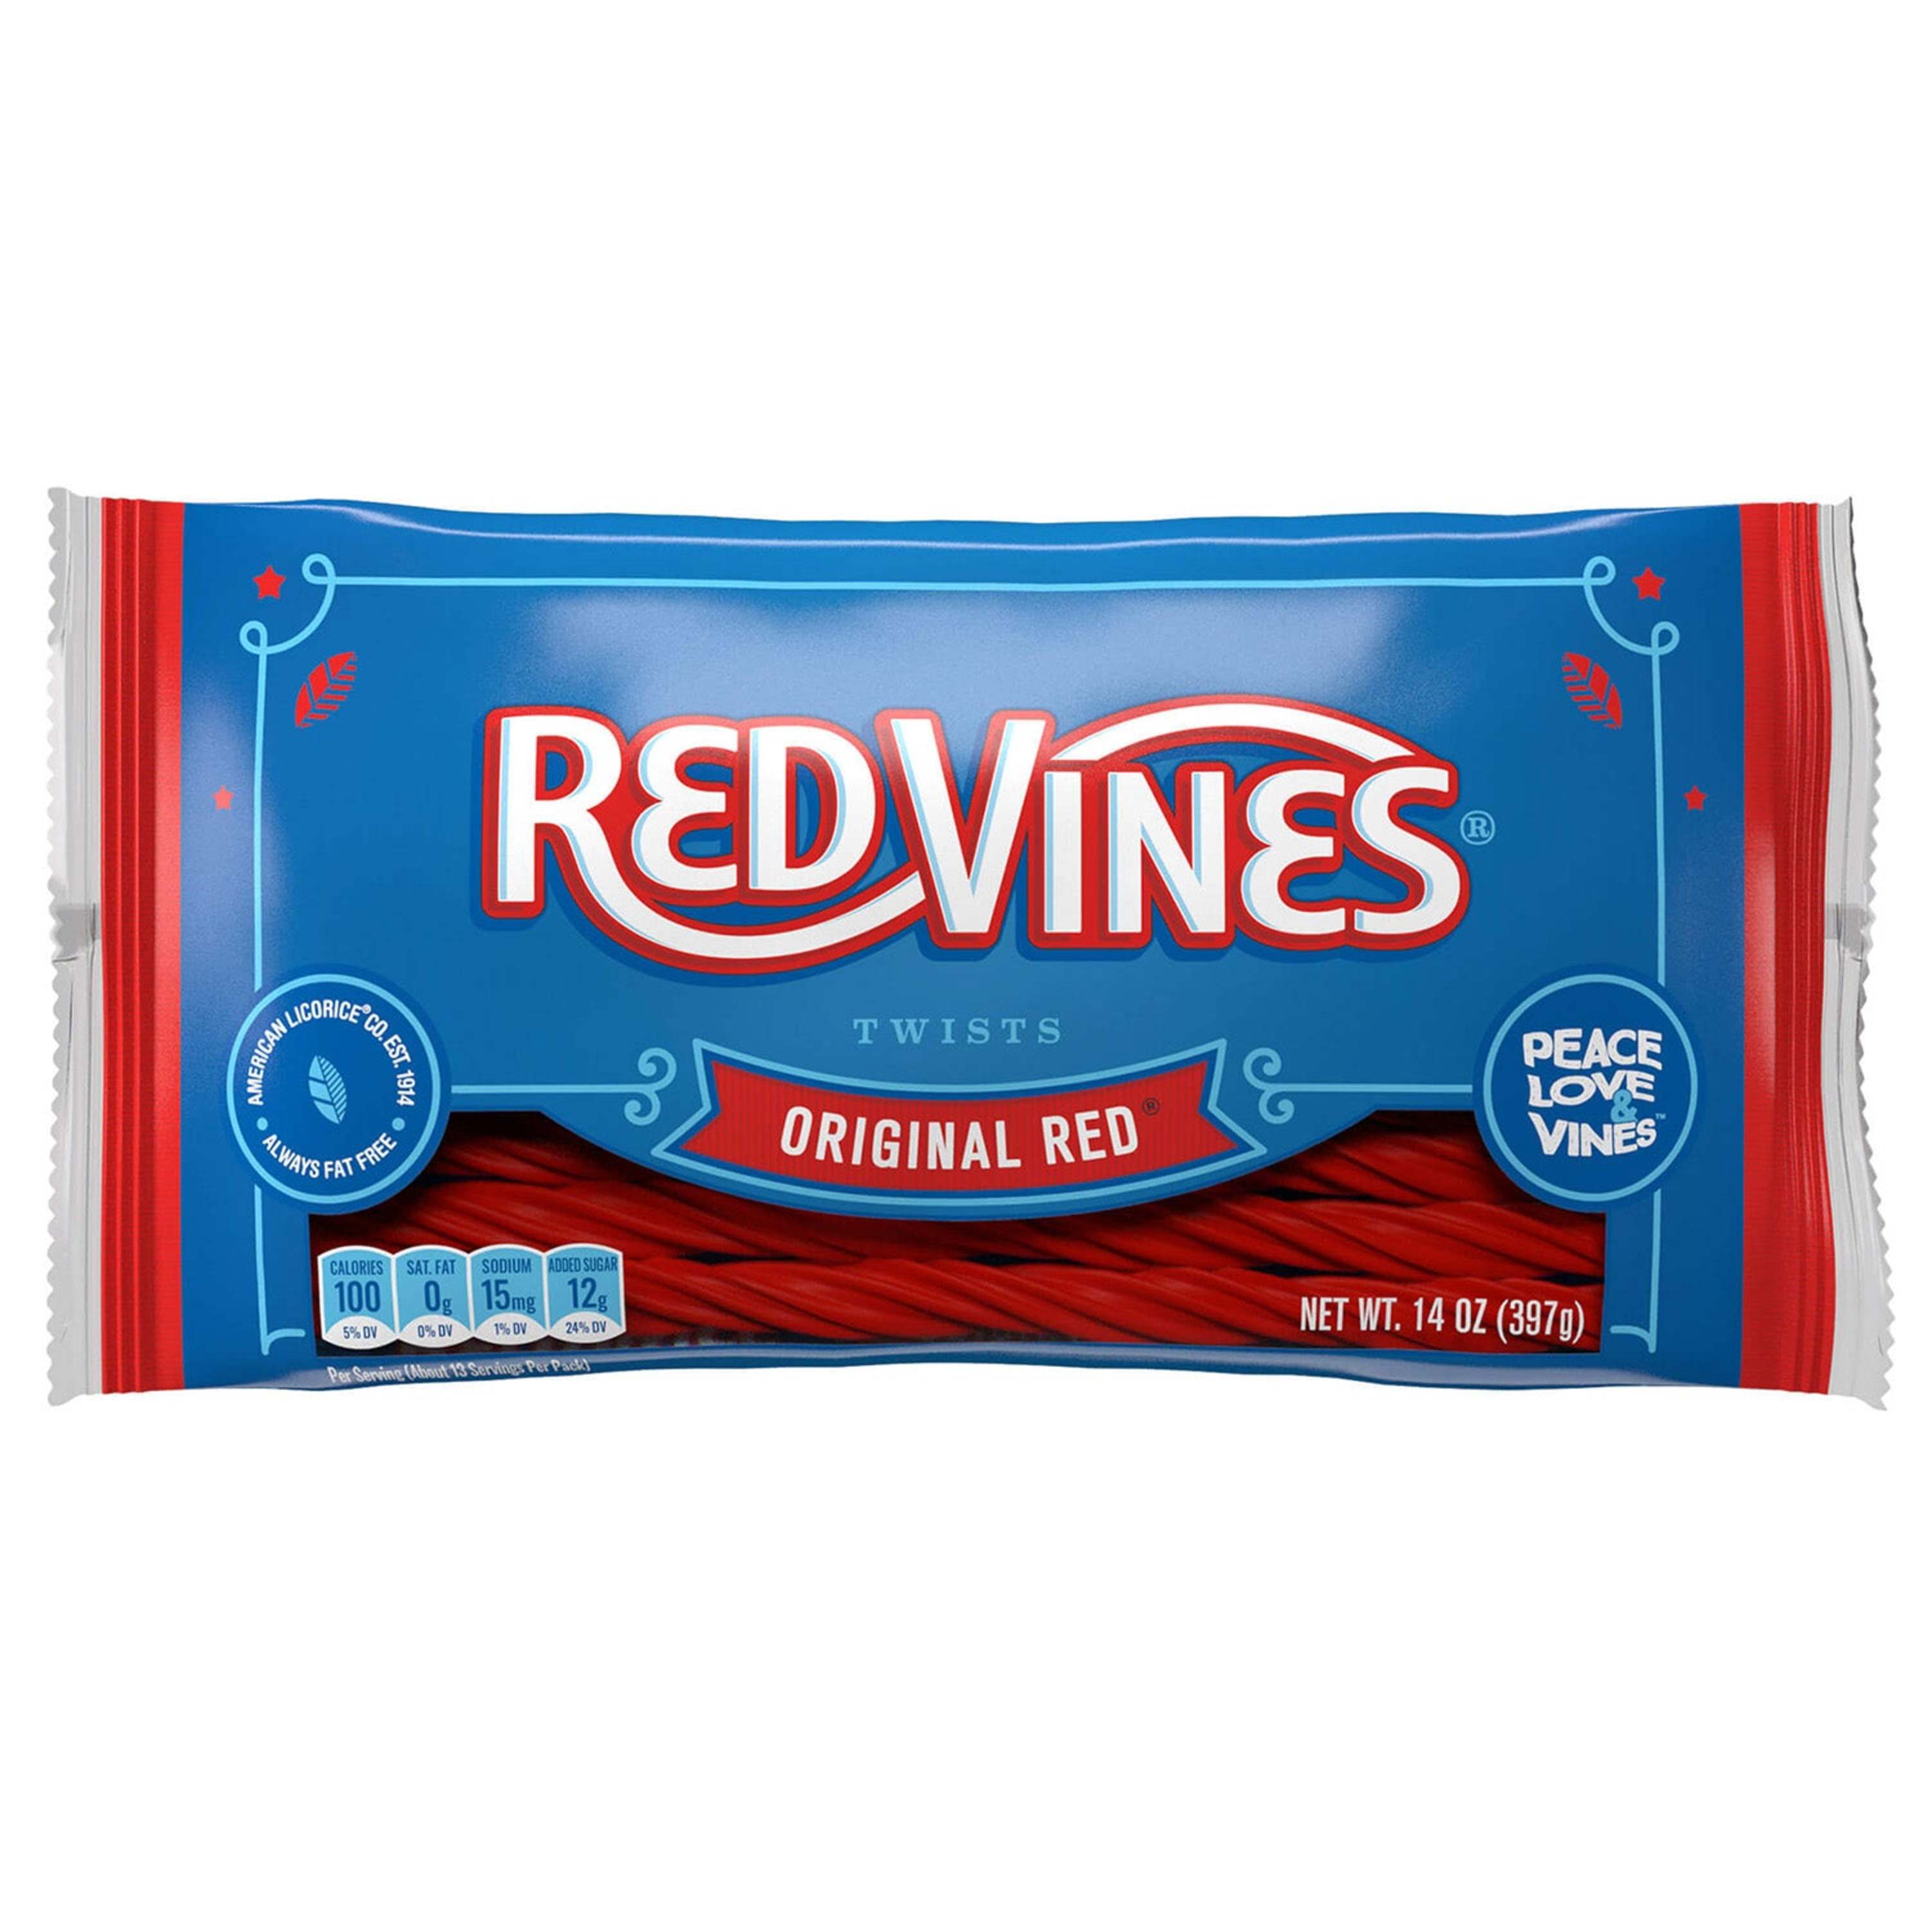 RED VINES Original Red licorice twists - front of 14oz bag